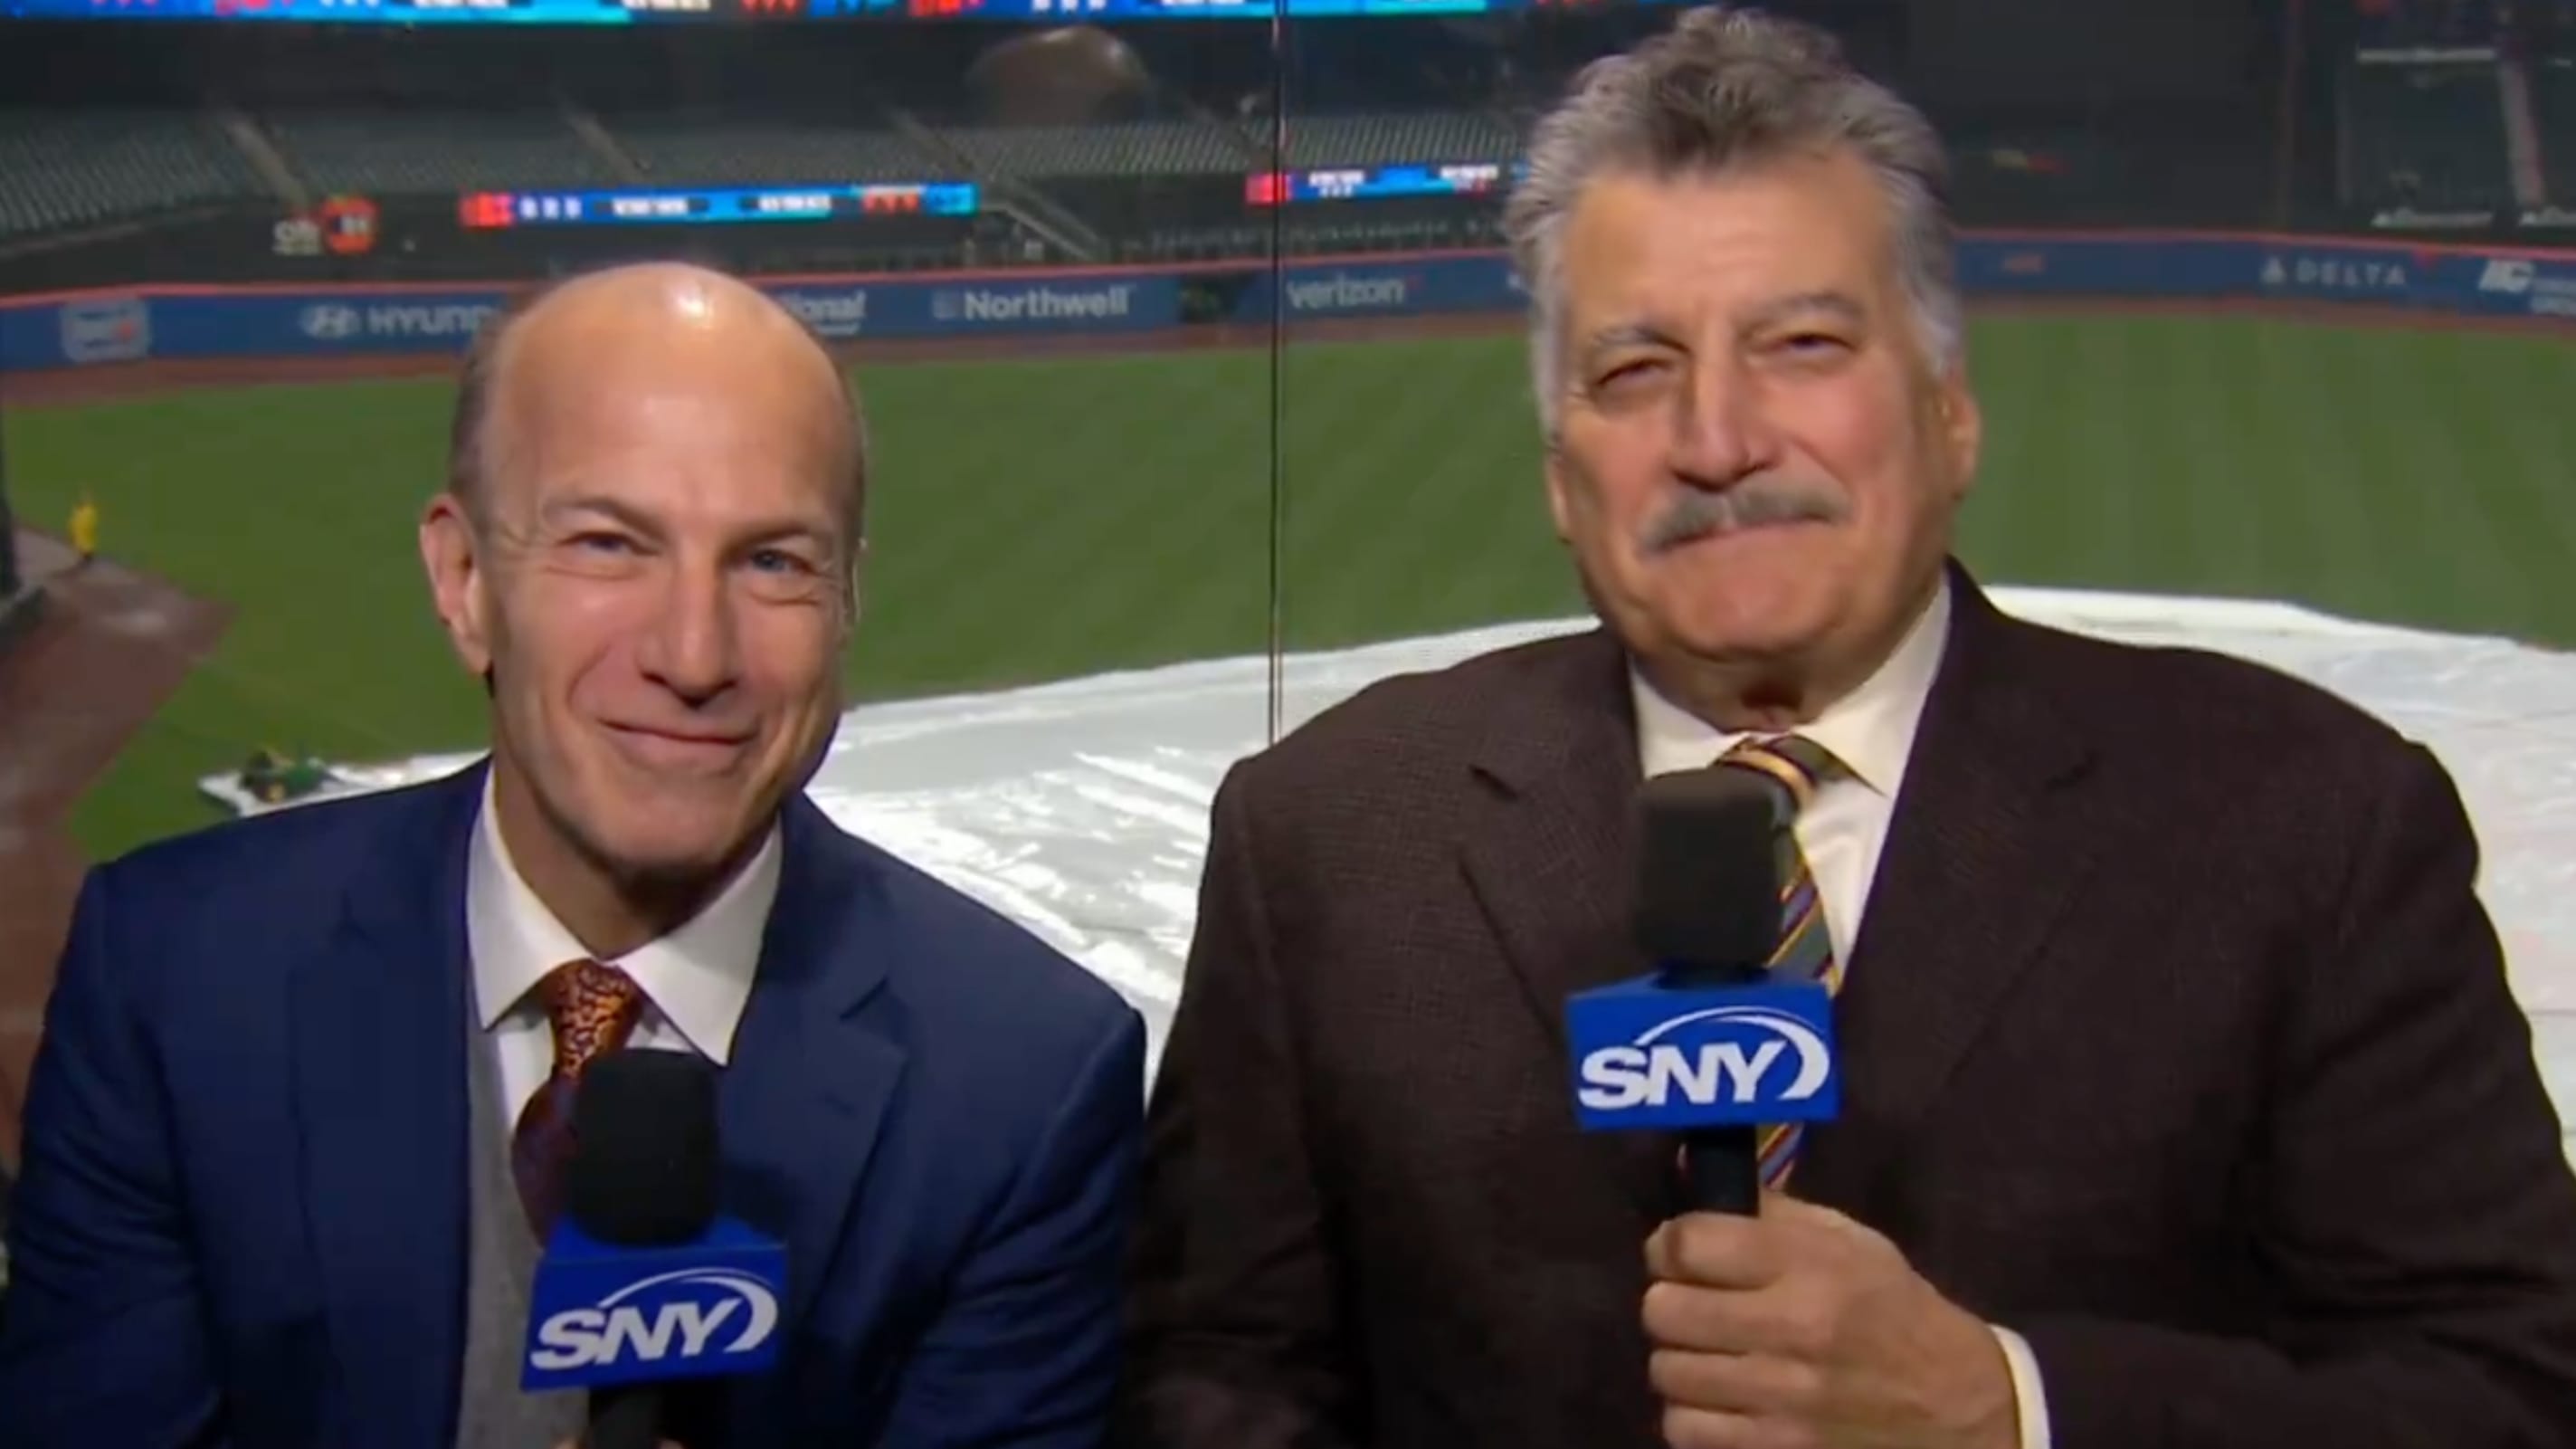 Mets broadcasters Gary Cohen and Keith Hernandez on the call.